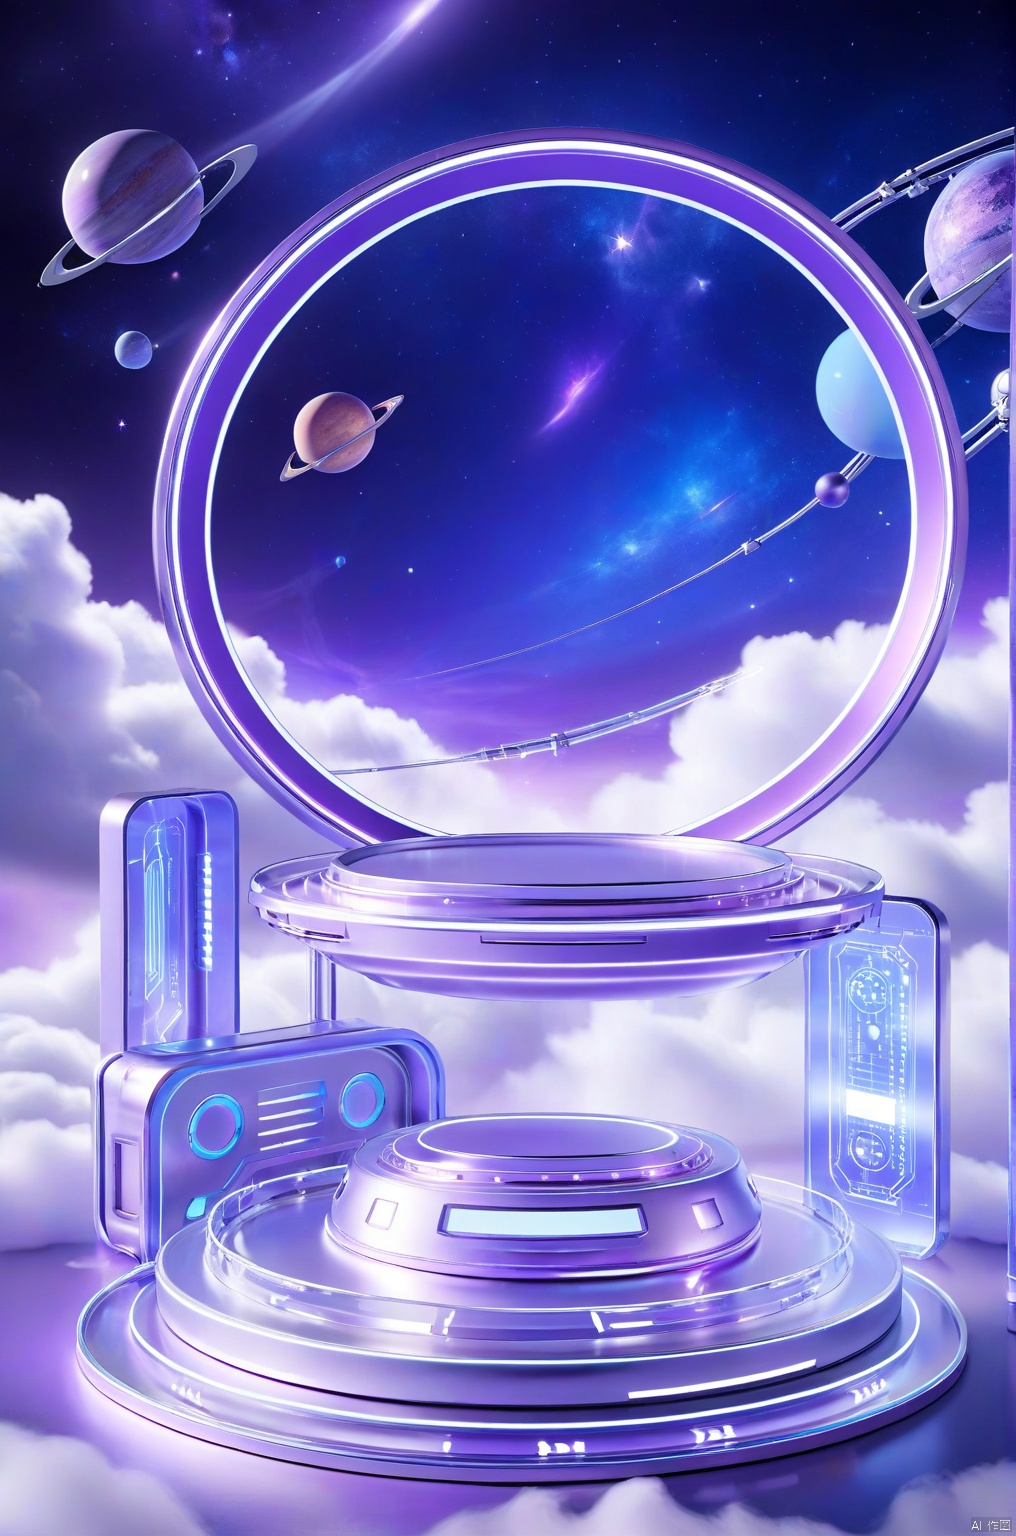 E-commerce booth, a round podium on the ground in the middle,  

purple futuristic scene theme, 
clouds, starry sky, planets in the sky, glowing beam in the background, 
a sleek, metallic spaceship hovers above a transparent glass platform, its circuitry and wiring visible beneath the surface. The ship's curved design reflects off the glass, creating a mesmerizing play of light and shadow. 

professional 3d model, anime artwork pixar, 3d style, good shine, OC rendering, highly detailed, volumetric, dramatic lighting,